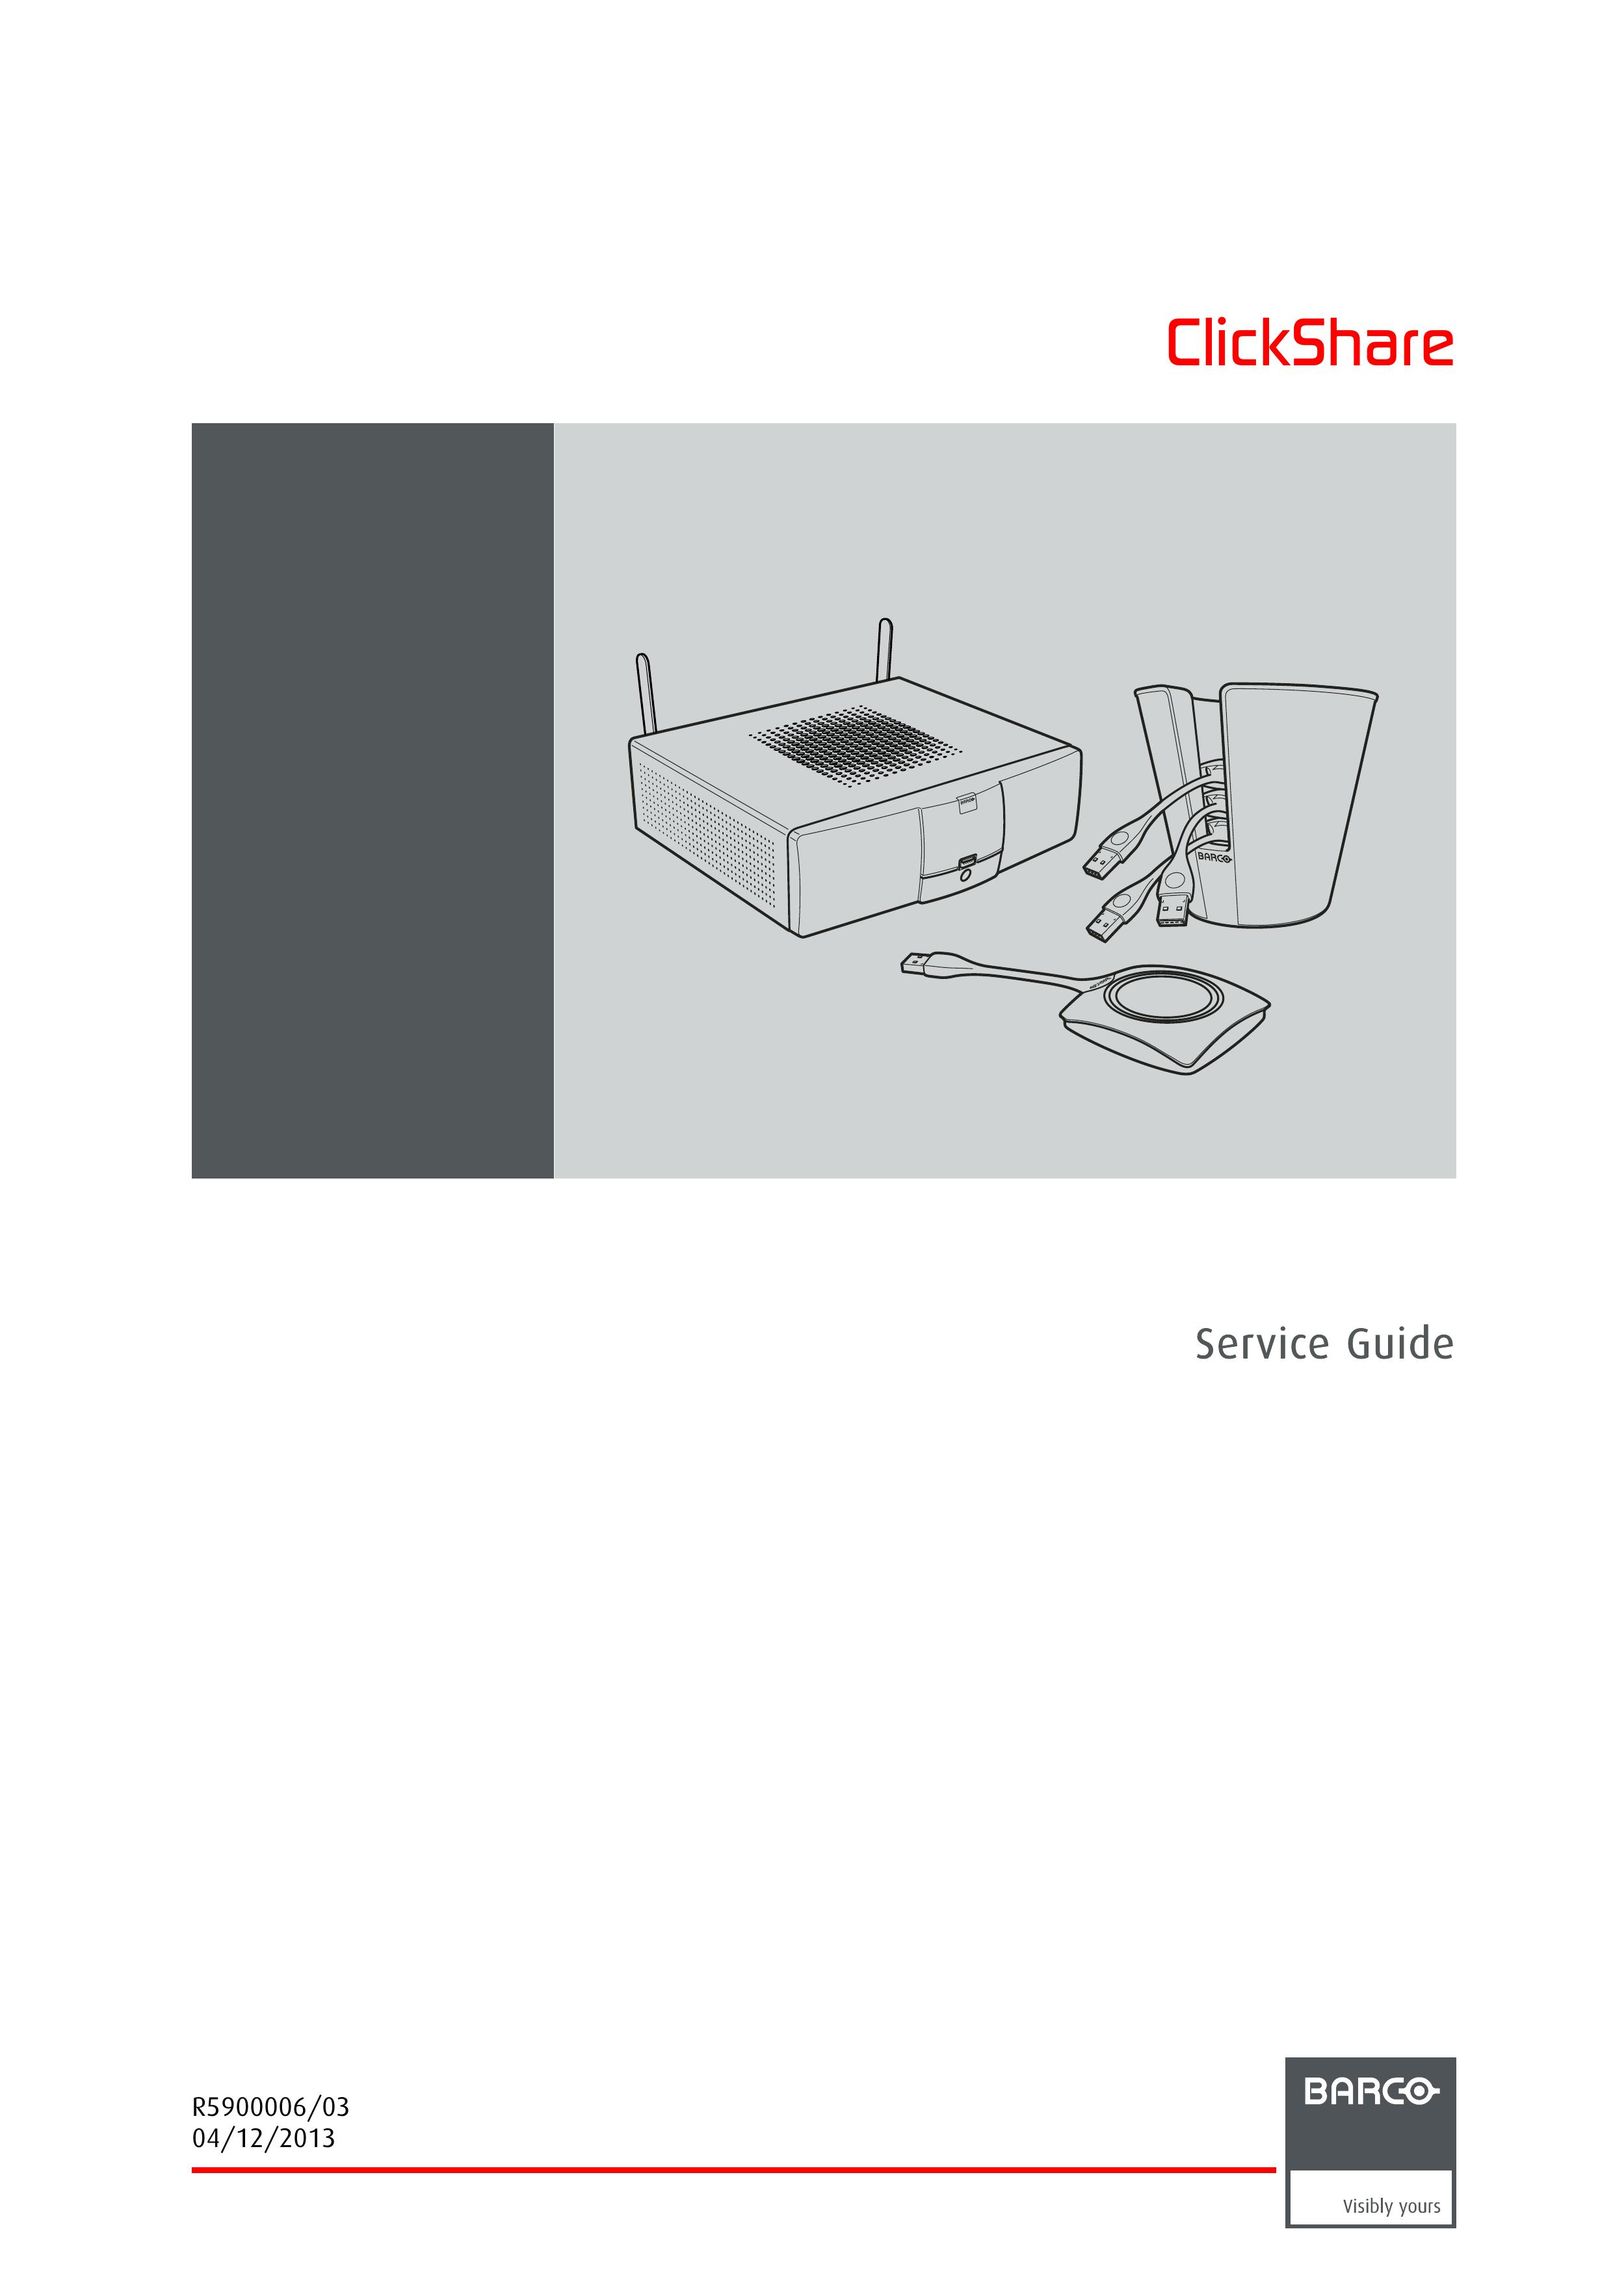 Barco 3 Cell Phone Accessories User Manual